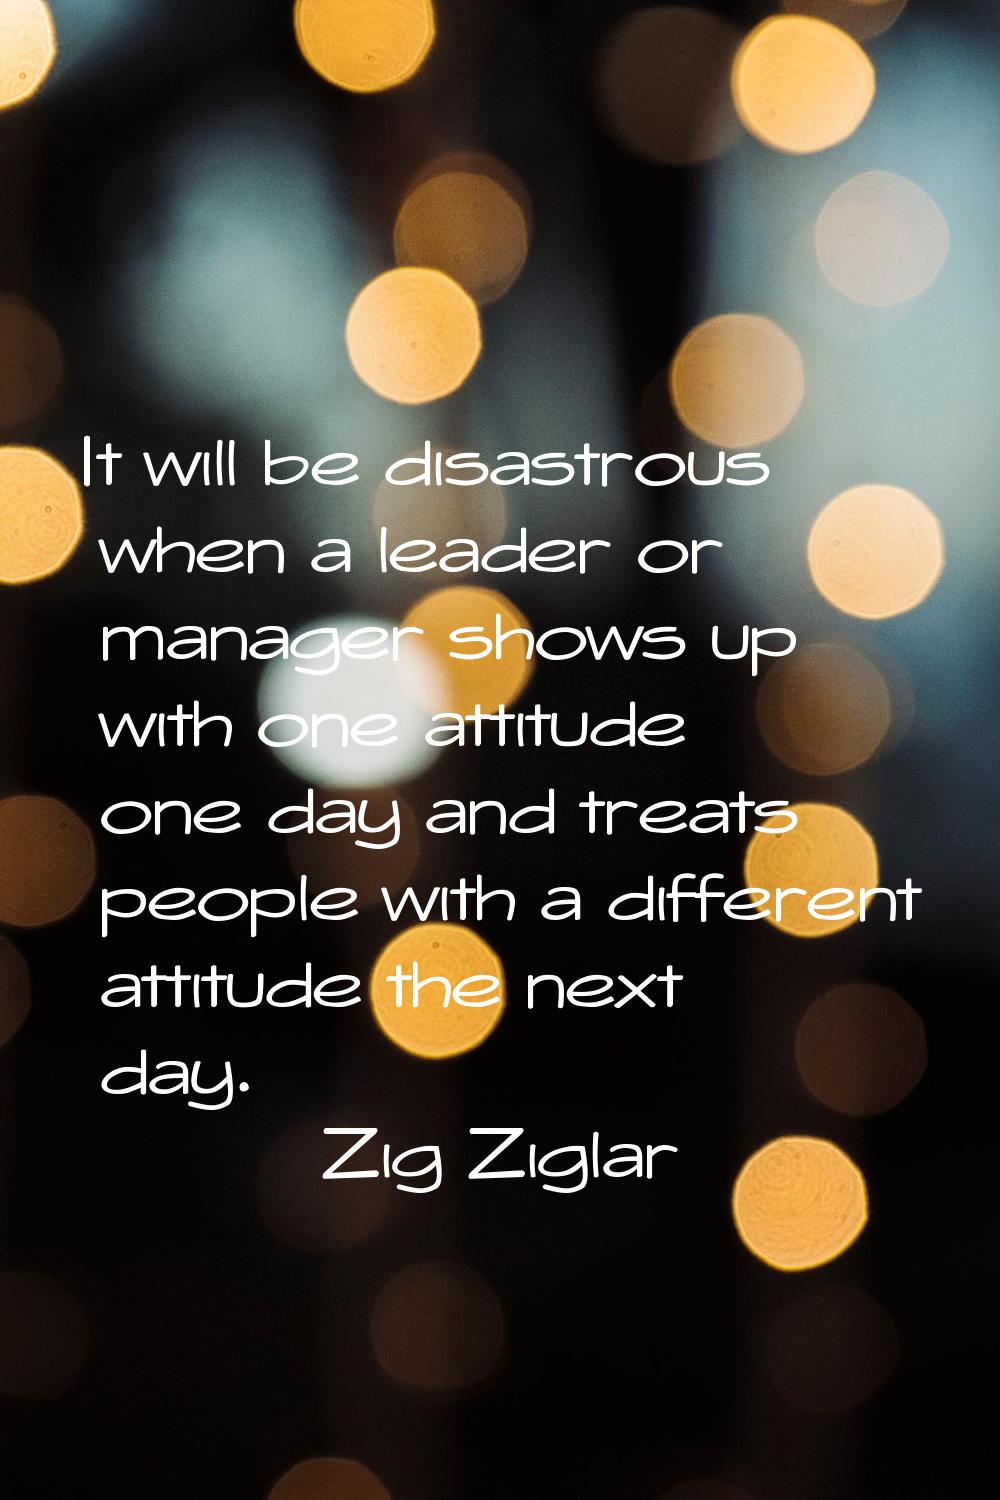 It will be disastrous when a leader or manager shows up with one attitude one day and treats people